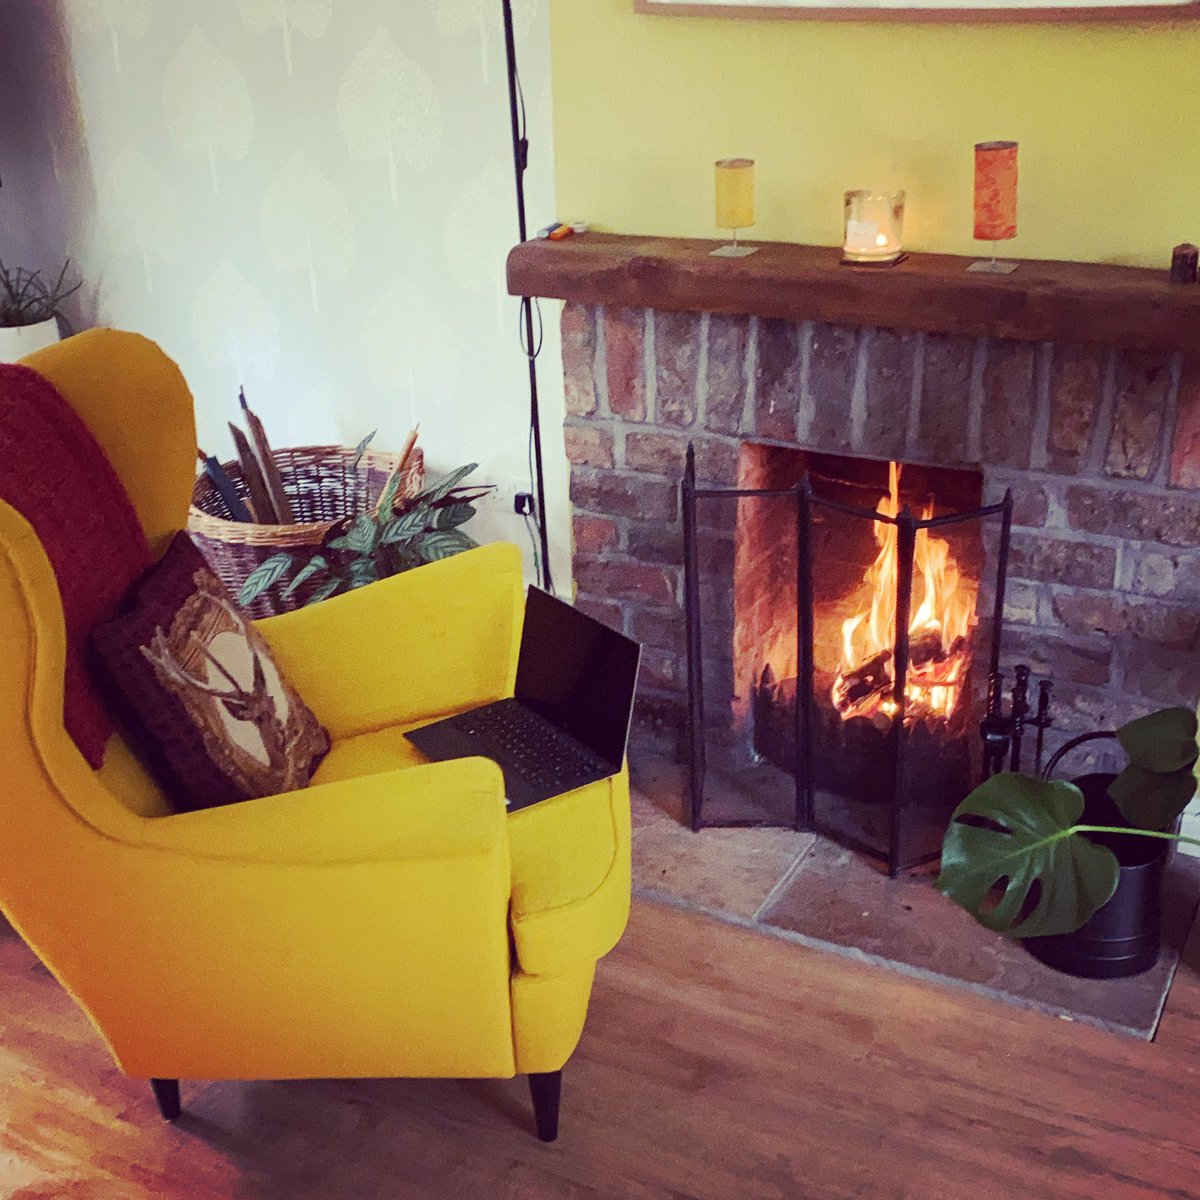 Today is definitely a pull the armchair right up to the fire and write kind of day... 💛

Final touches to my debut middle grade novel before submission! 🙂

#KKsDiary 
#MgLit #aspiringauthor #Writer #writerscommunity #amwriting #childrenswriter